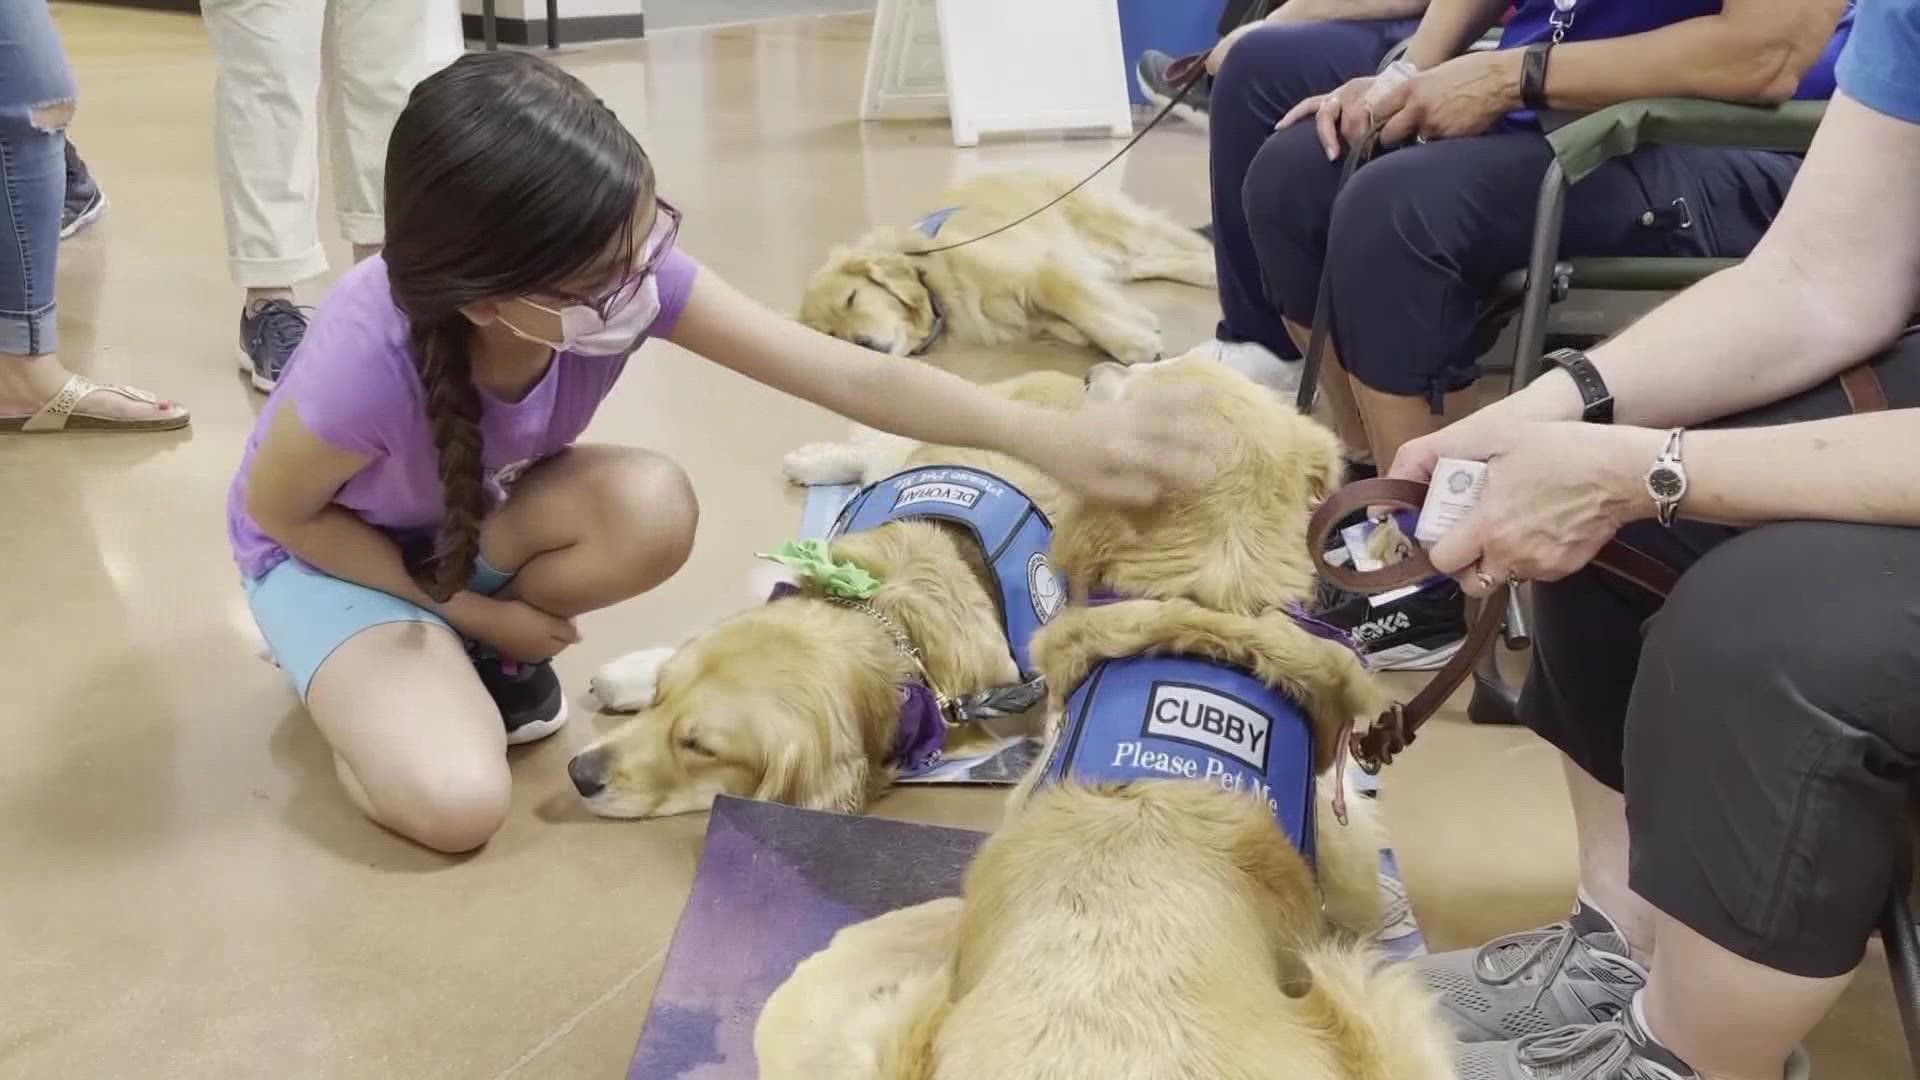 "Whatever the emotions are, that the kids or the parents or staff are having or community, they see these golden retrievers and we see smiles."